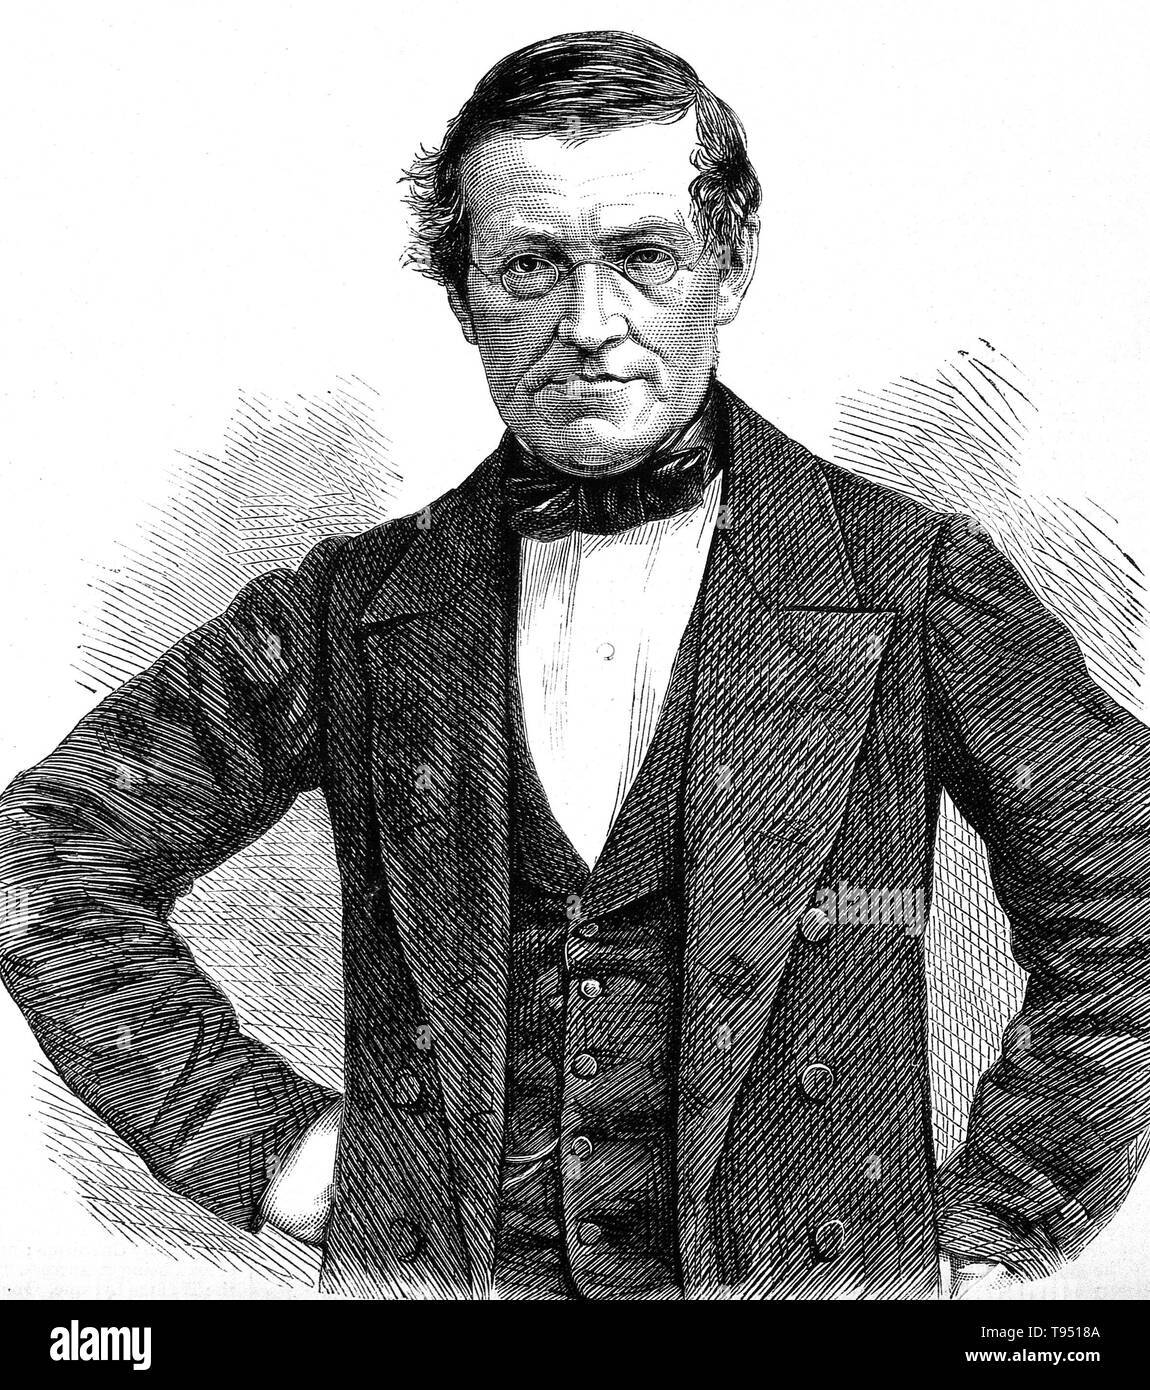 Sir Charles Wheatstone, wood engraving. Charles Wheatstone (1802-1875) was an English scientist and inventor of many scientific breakthroughs of the Victorian era, including the English concertina, the stereoscope (a device for displaying three-dimensional images), and the Playfair cipher (an encryption technique). However, Wheatstone is best known for his contributions in the development of the Wheatstone bridge, originally invented by Samuel Hunter Christie, which is used to measure an unknown electrical resistance, and as a major figure in the development of telegraphy. Stock Photo